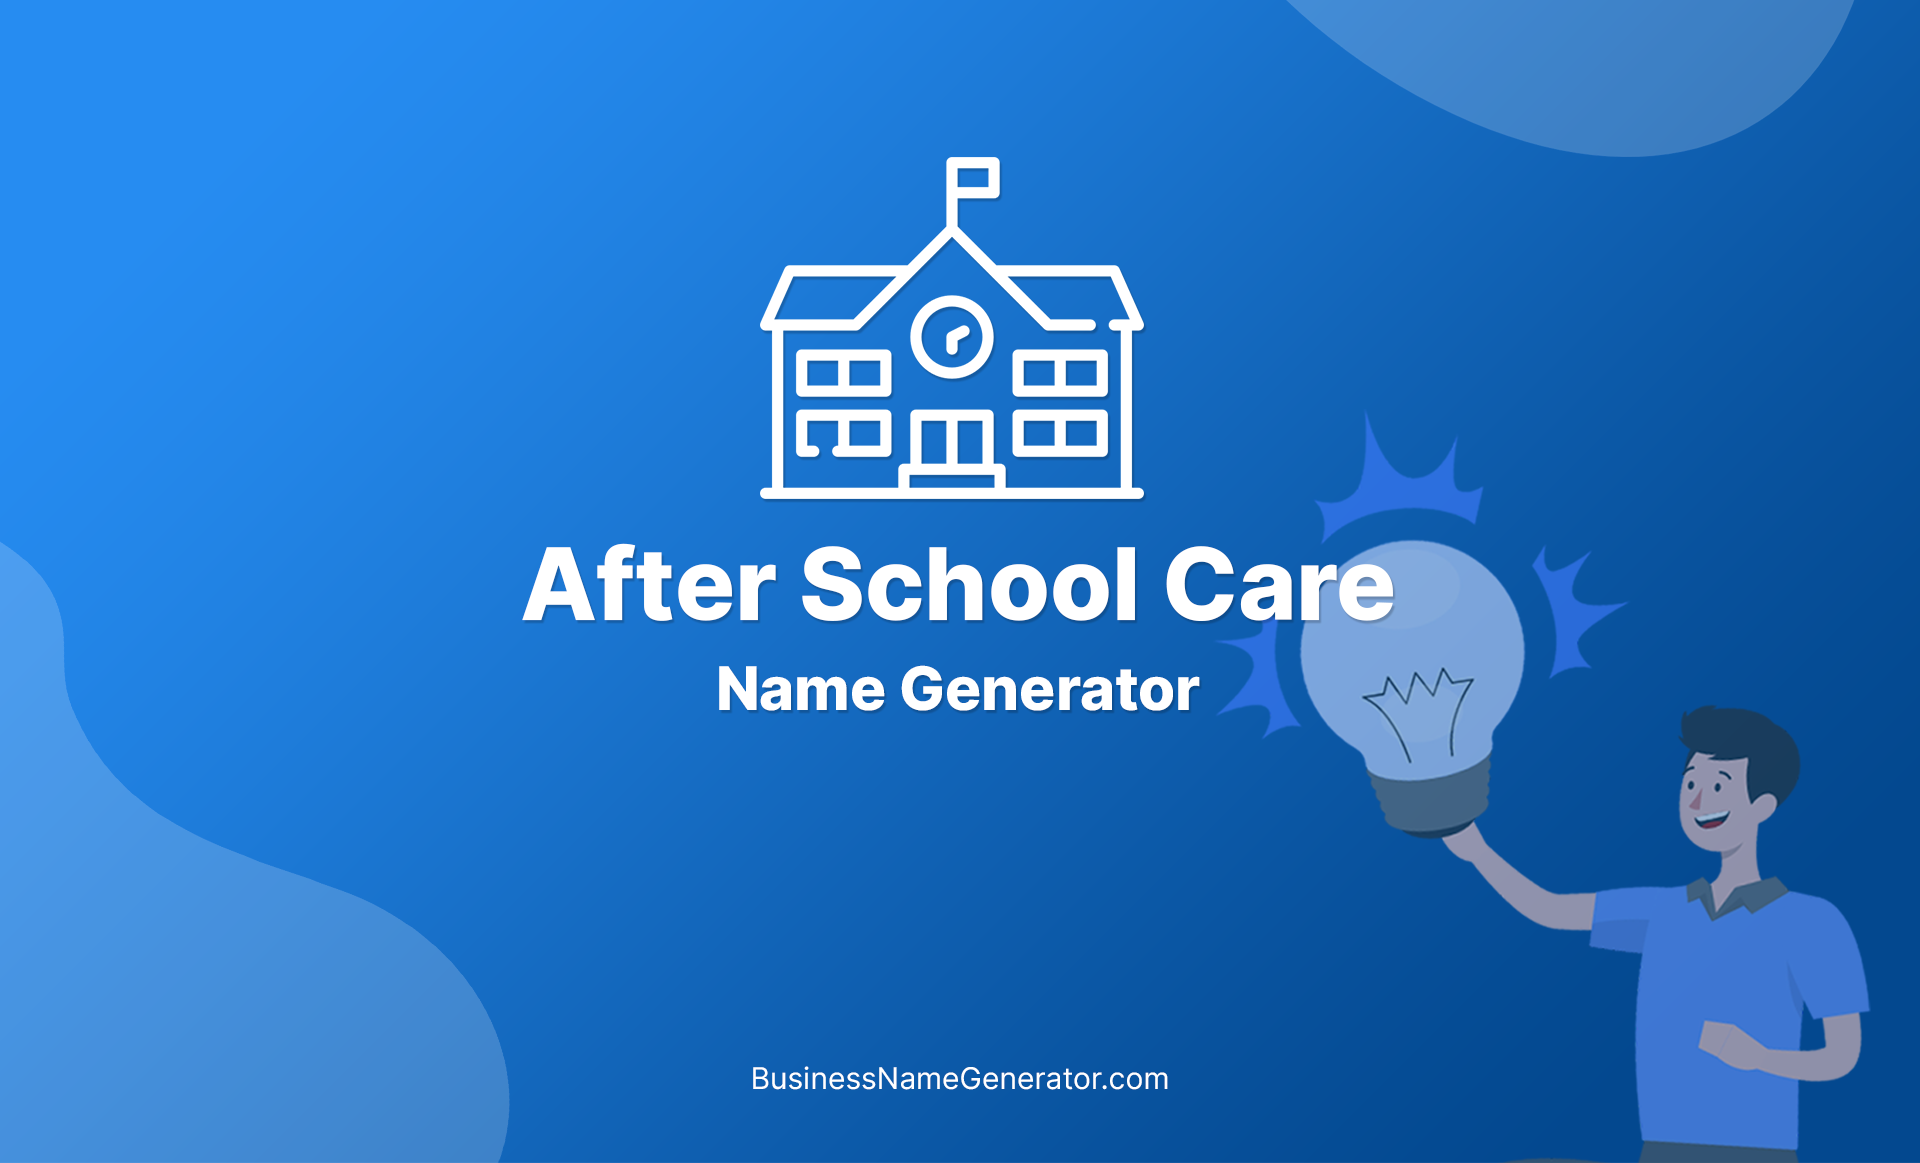 After School Care Name Generator